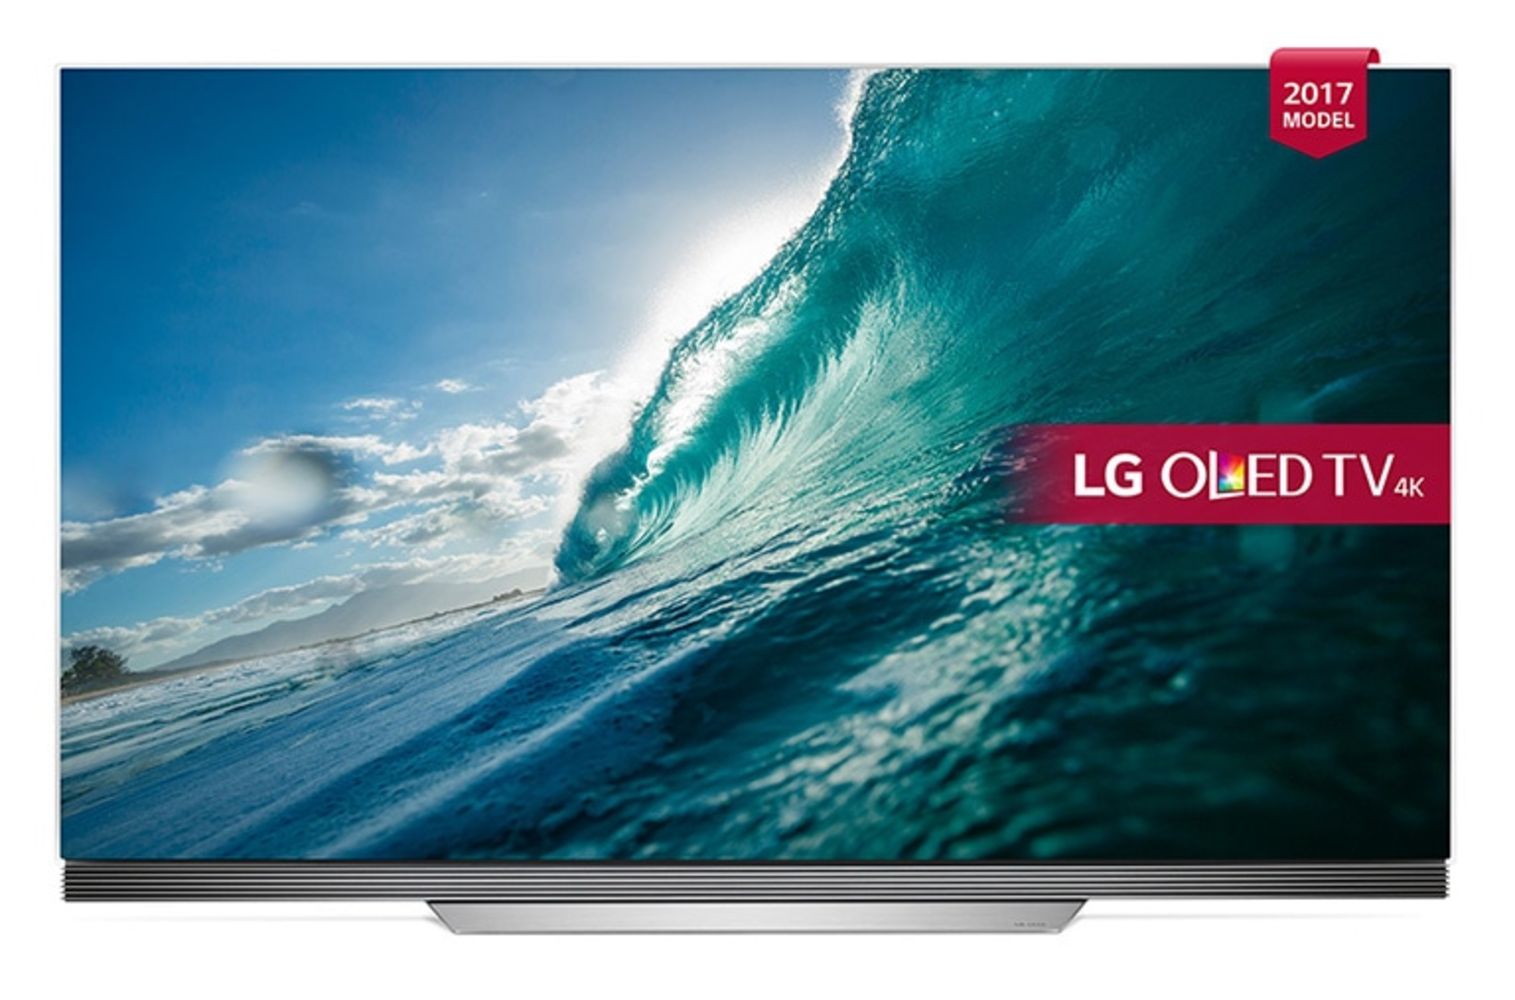 LG TVs & Monitors - Including 4K UHD Smart TVs In A Range Of Sizes, HD And Ultra-Wide Gaming Monitors